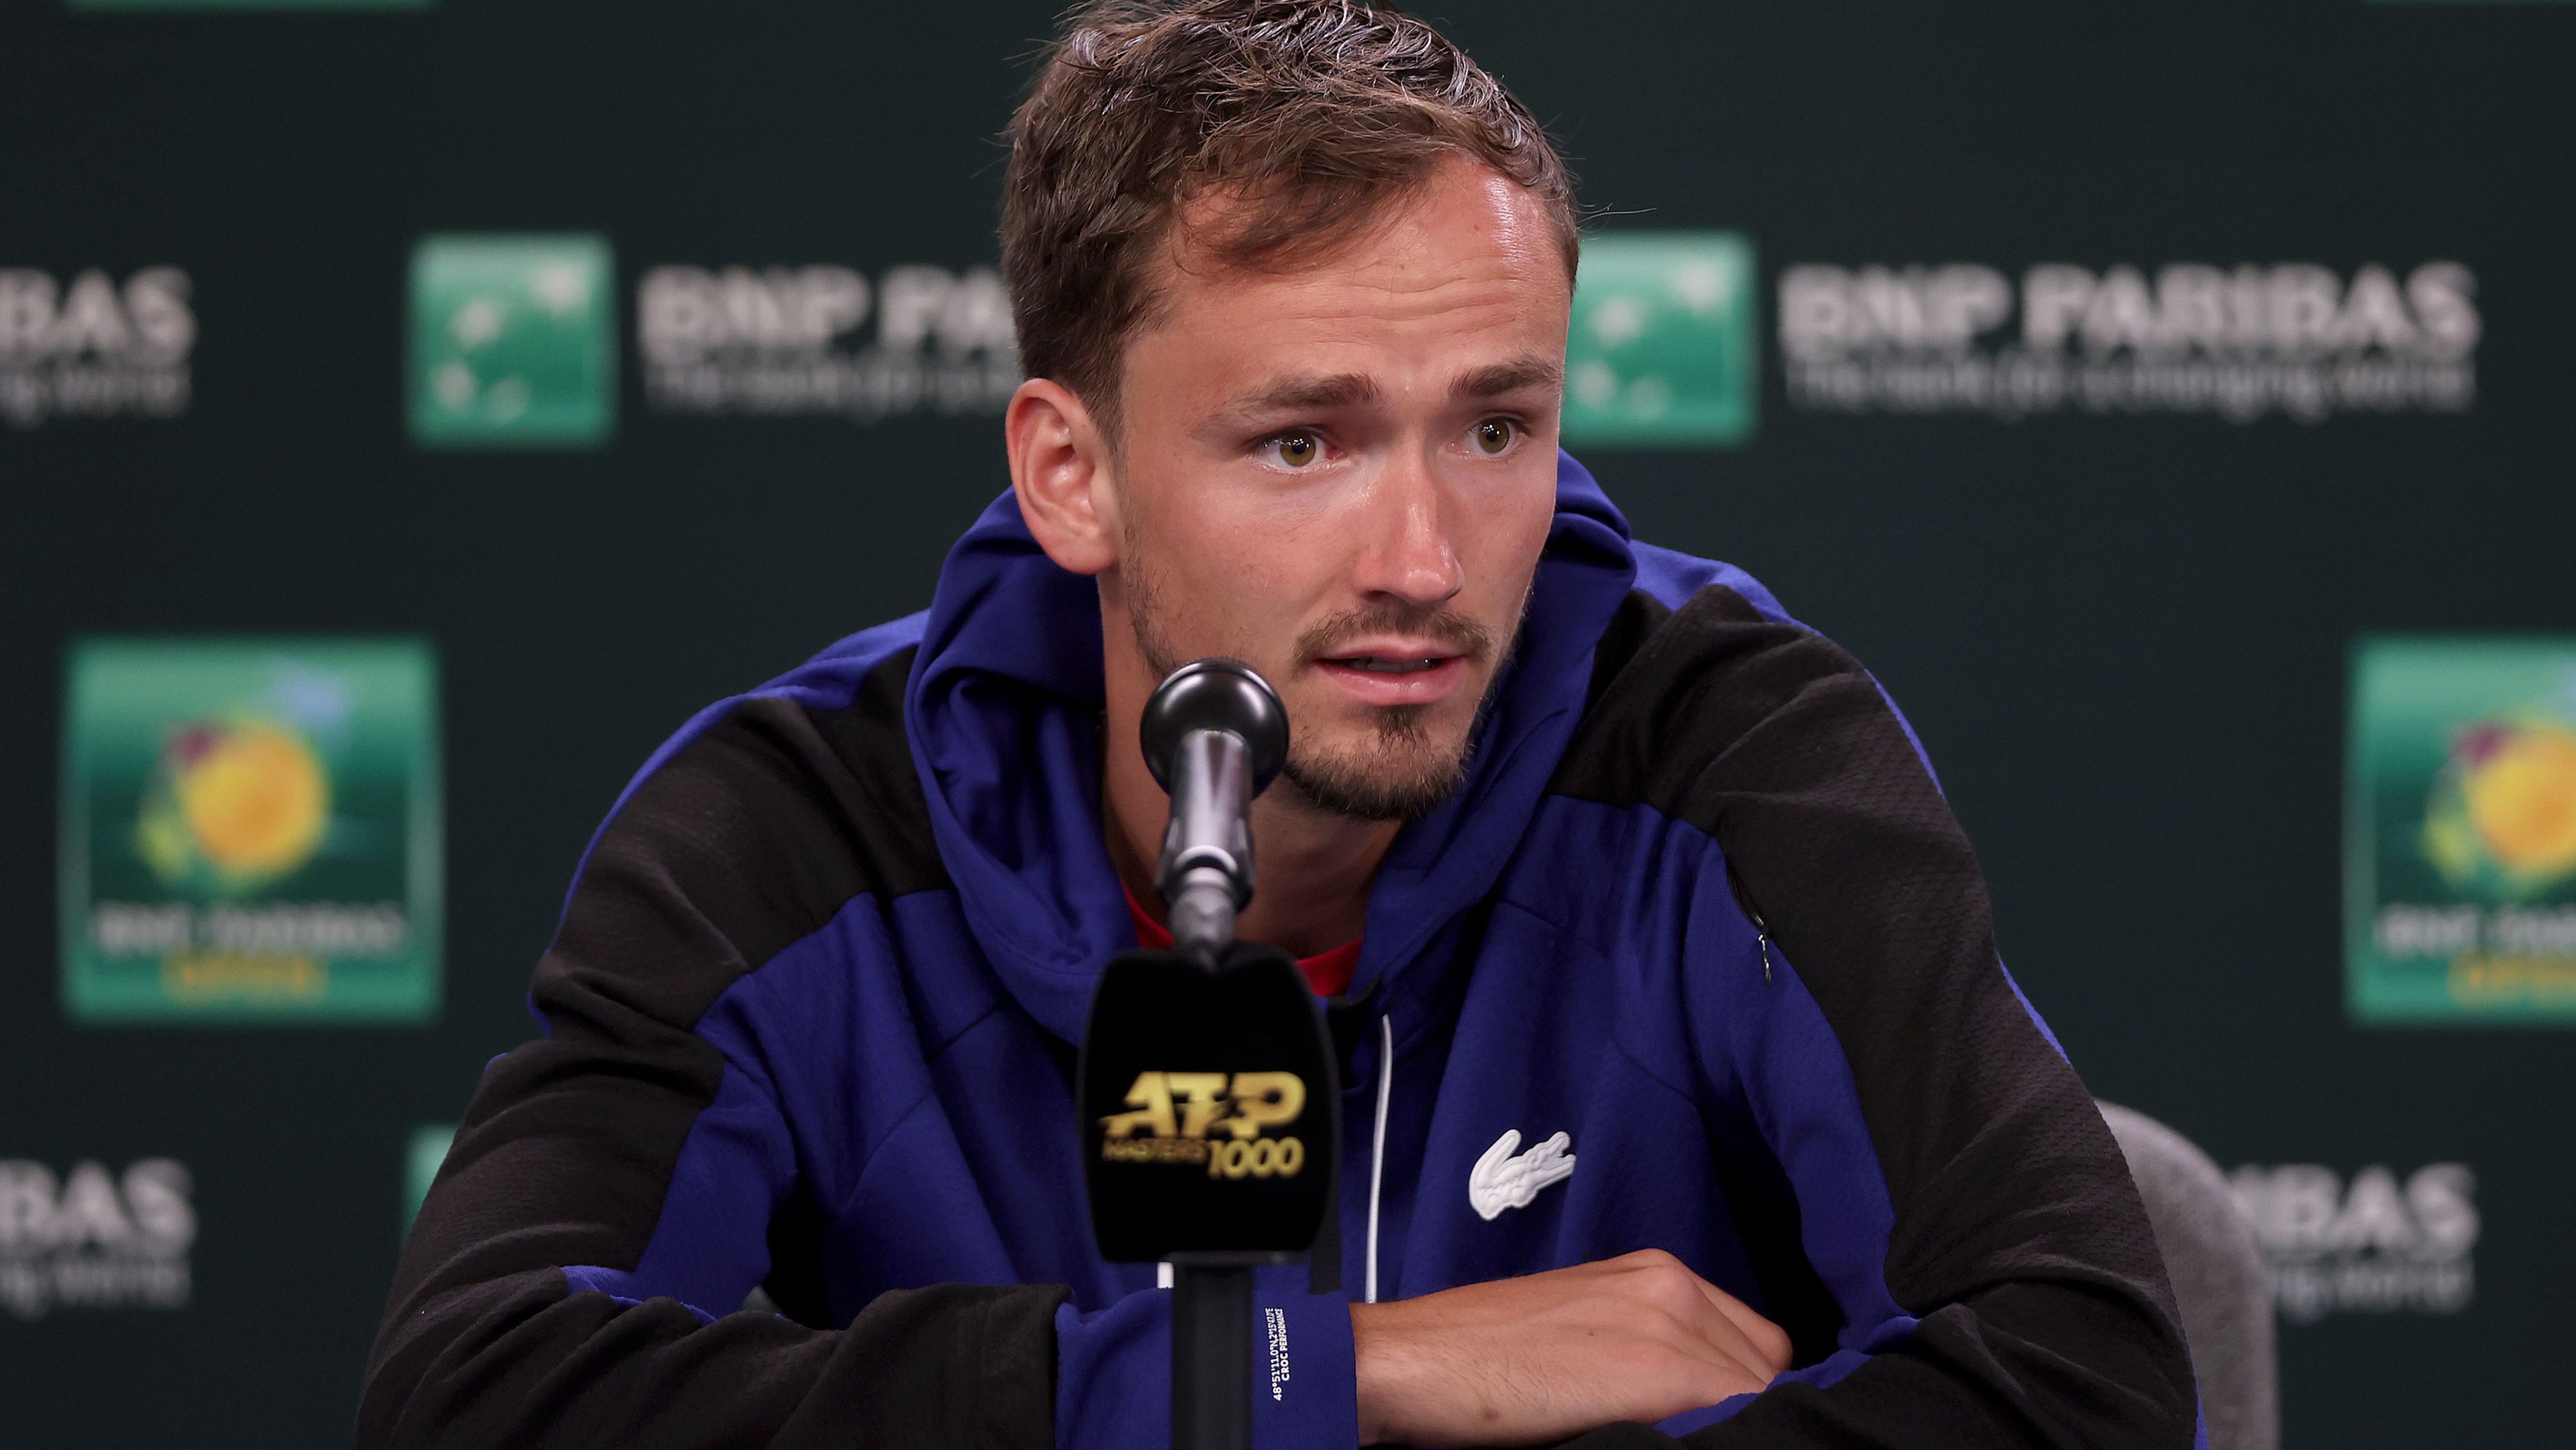 Daniil Medvedev of Russia fields questions from the media during the BNP Paribas Open at the Indian Wells Tennis Garden.